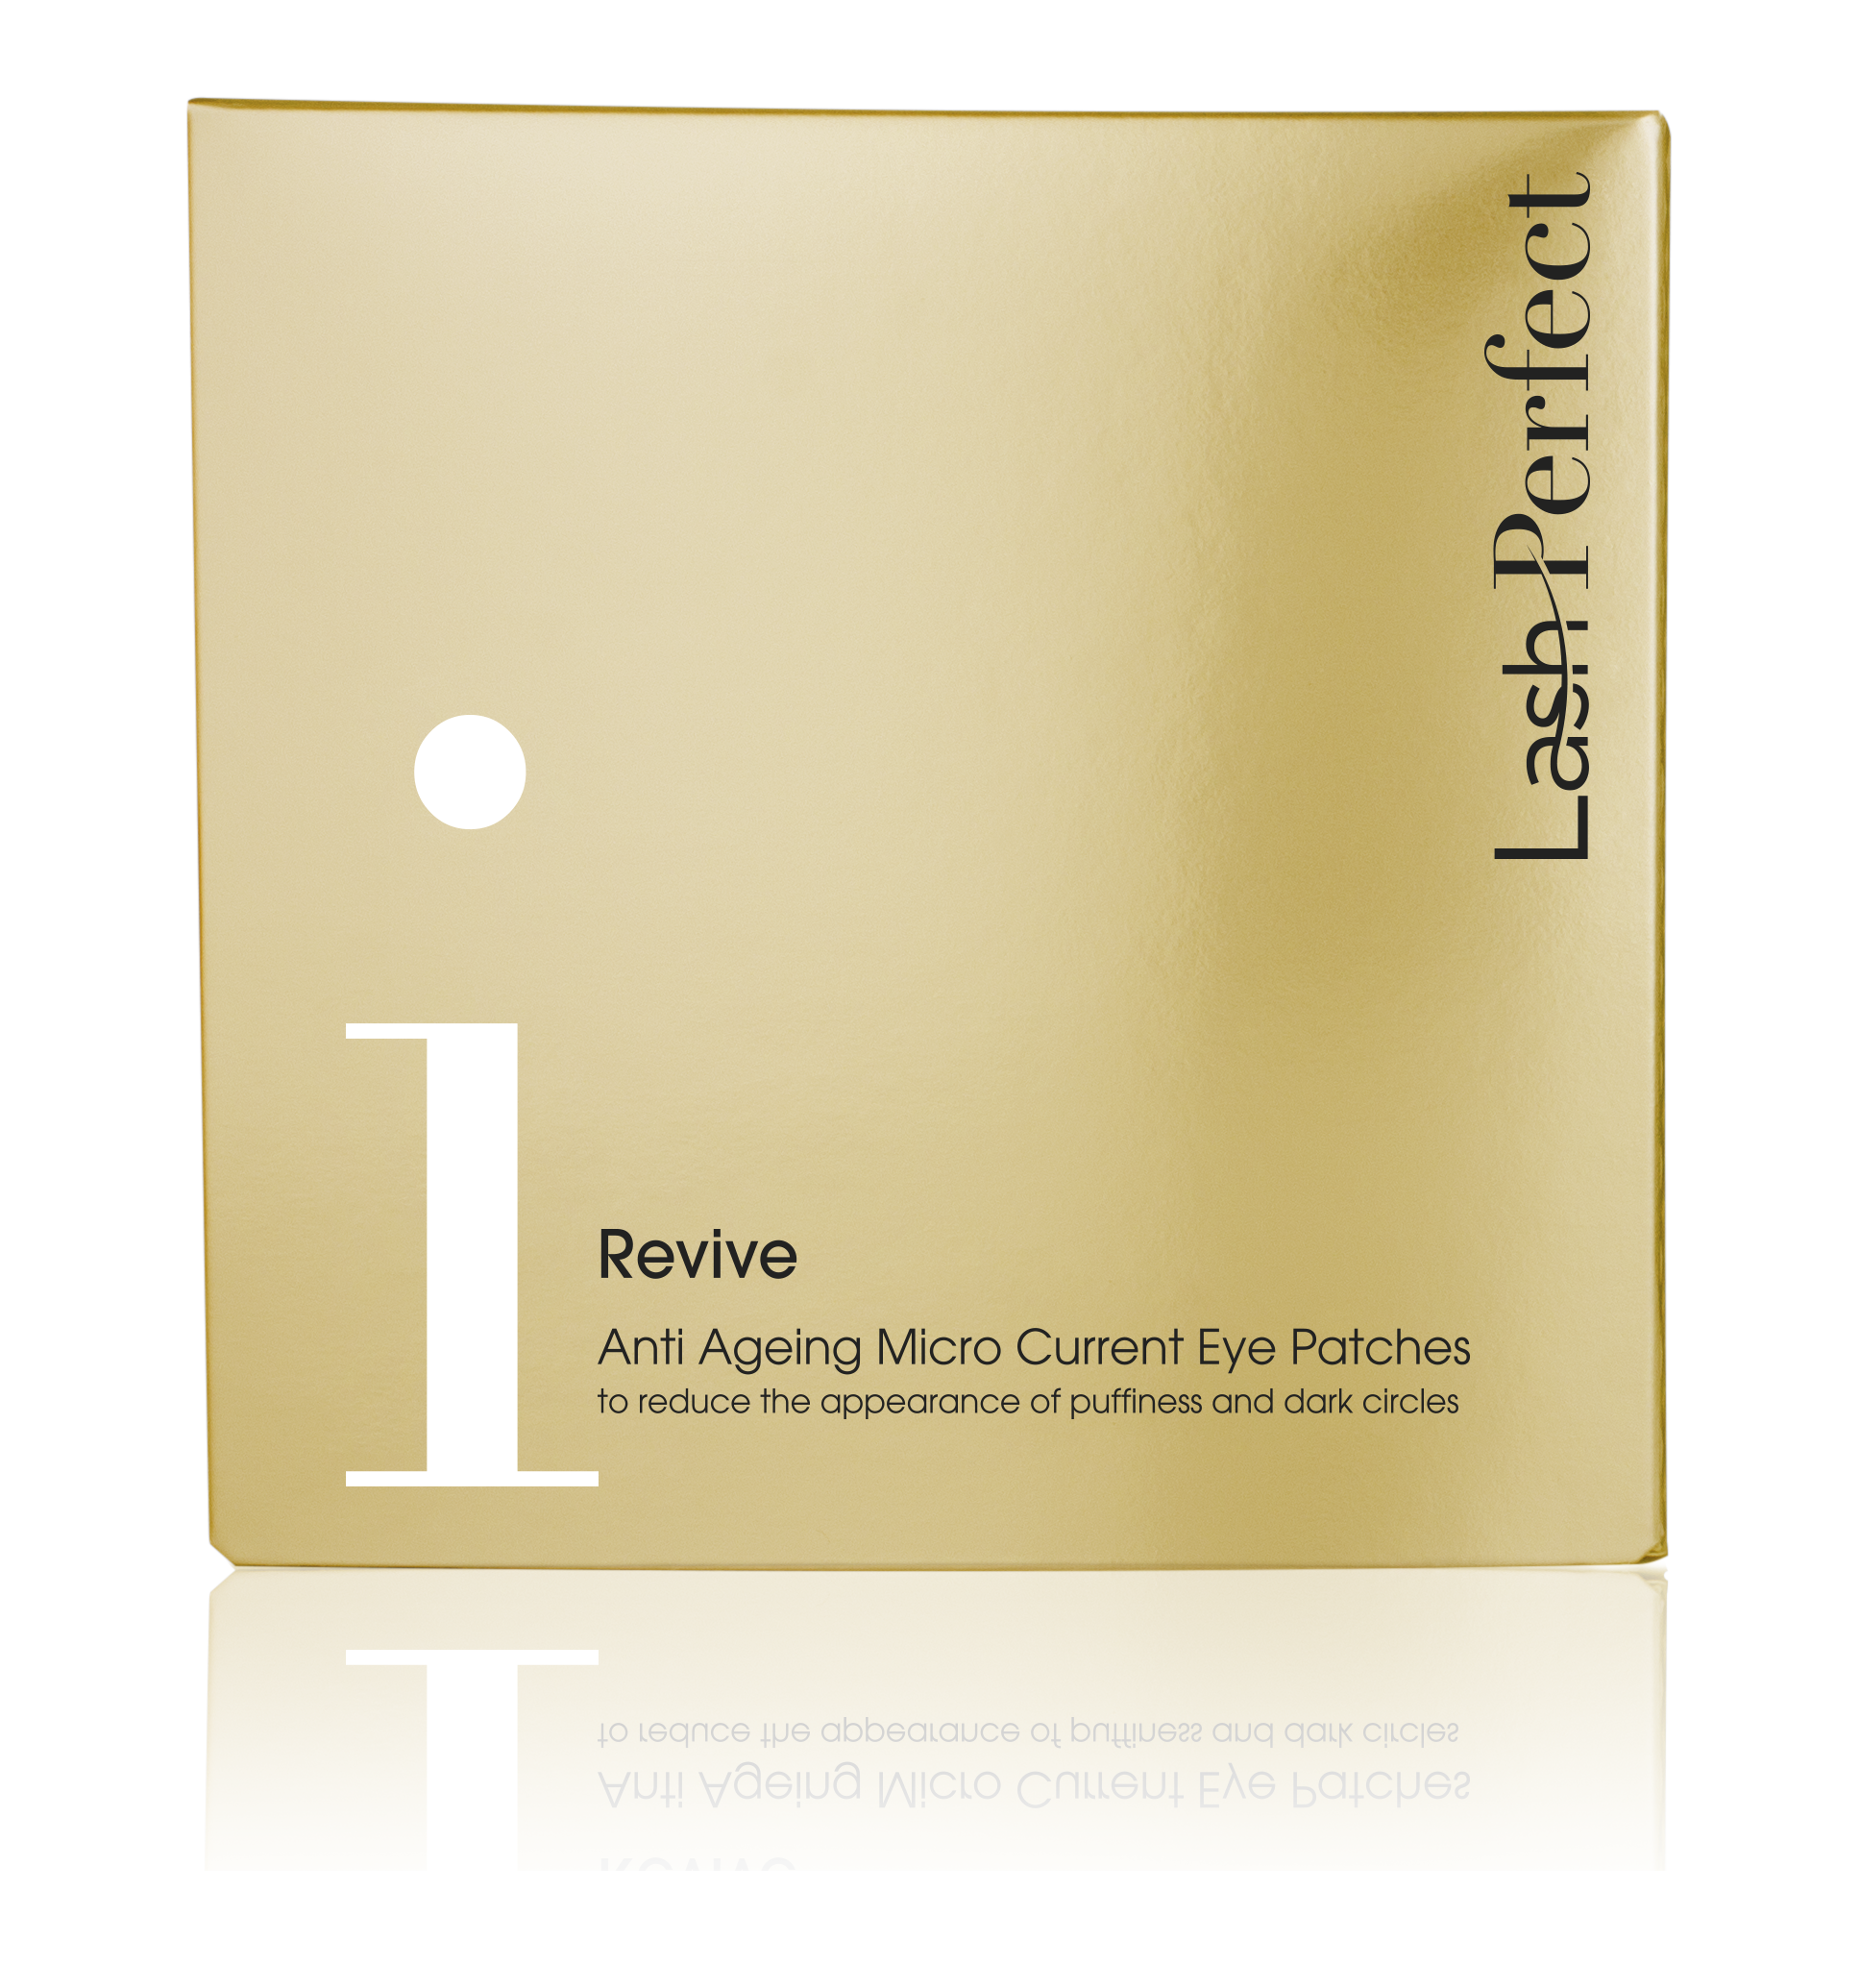 Lash Perfecft iRevive Anti-Ageing Micro-current Eye Patches